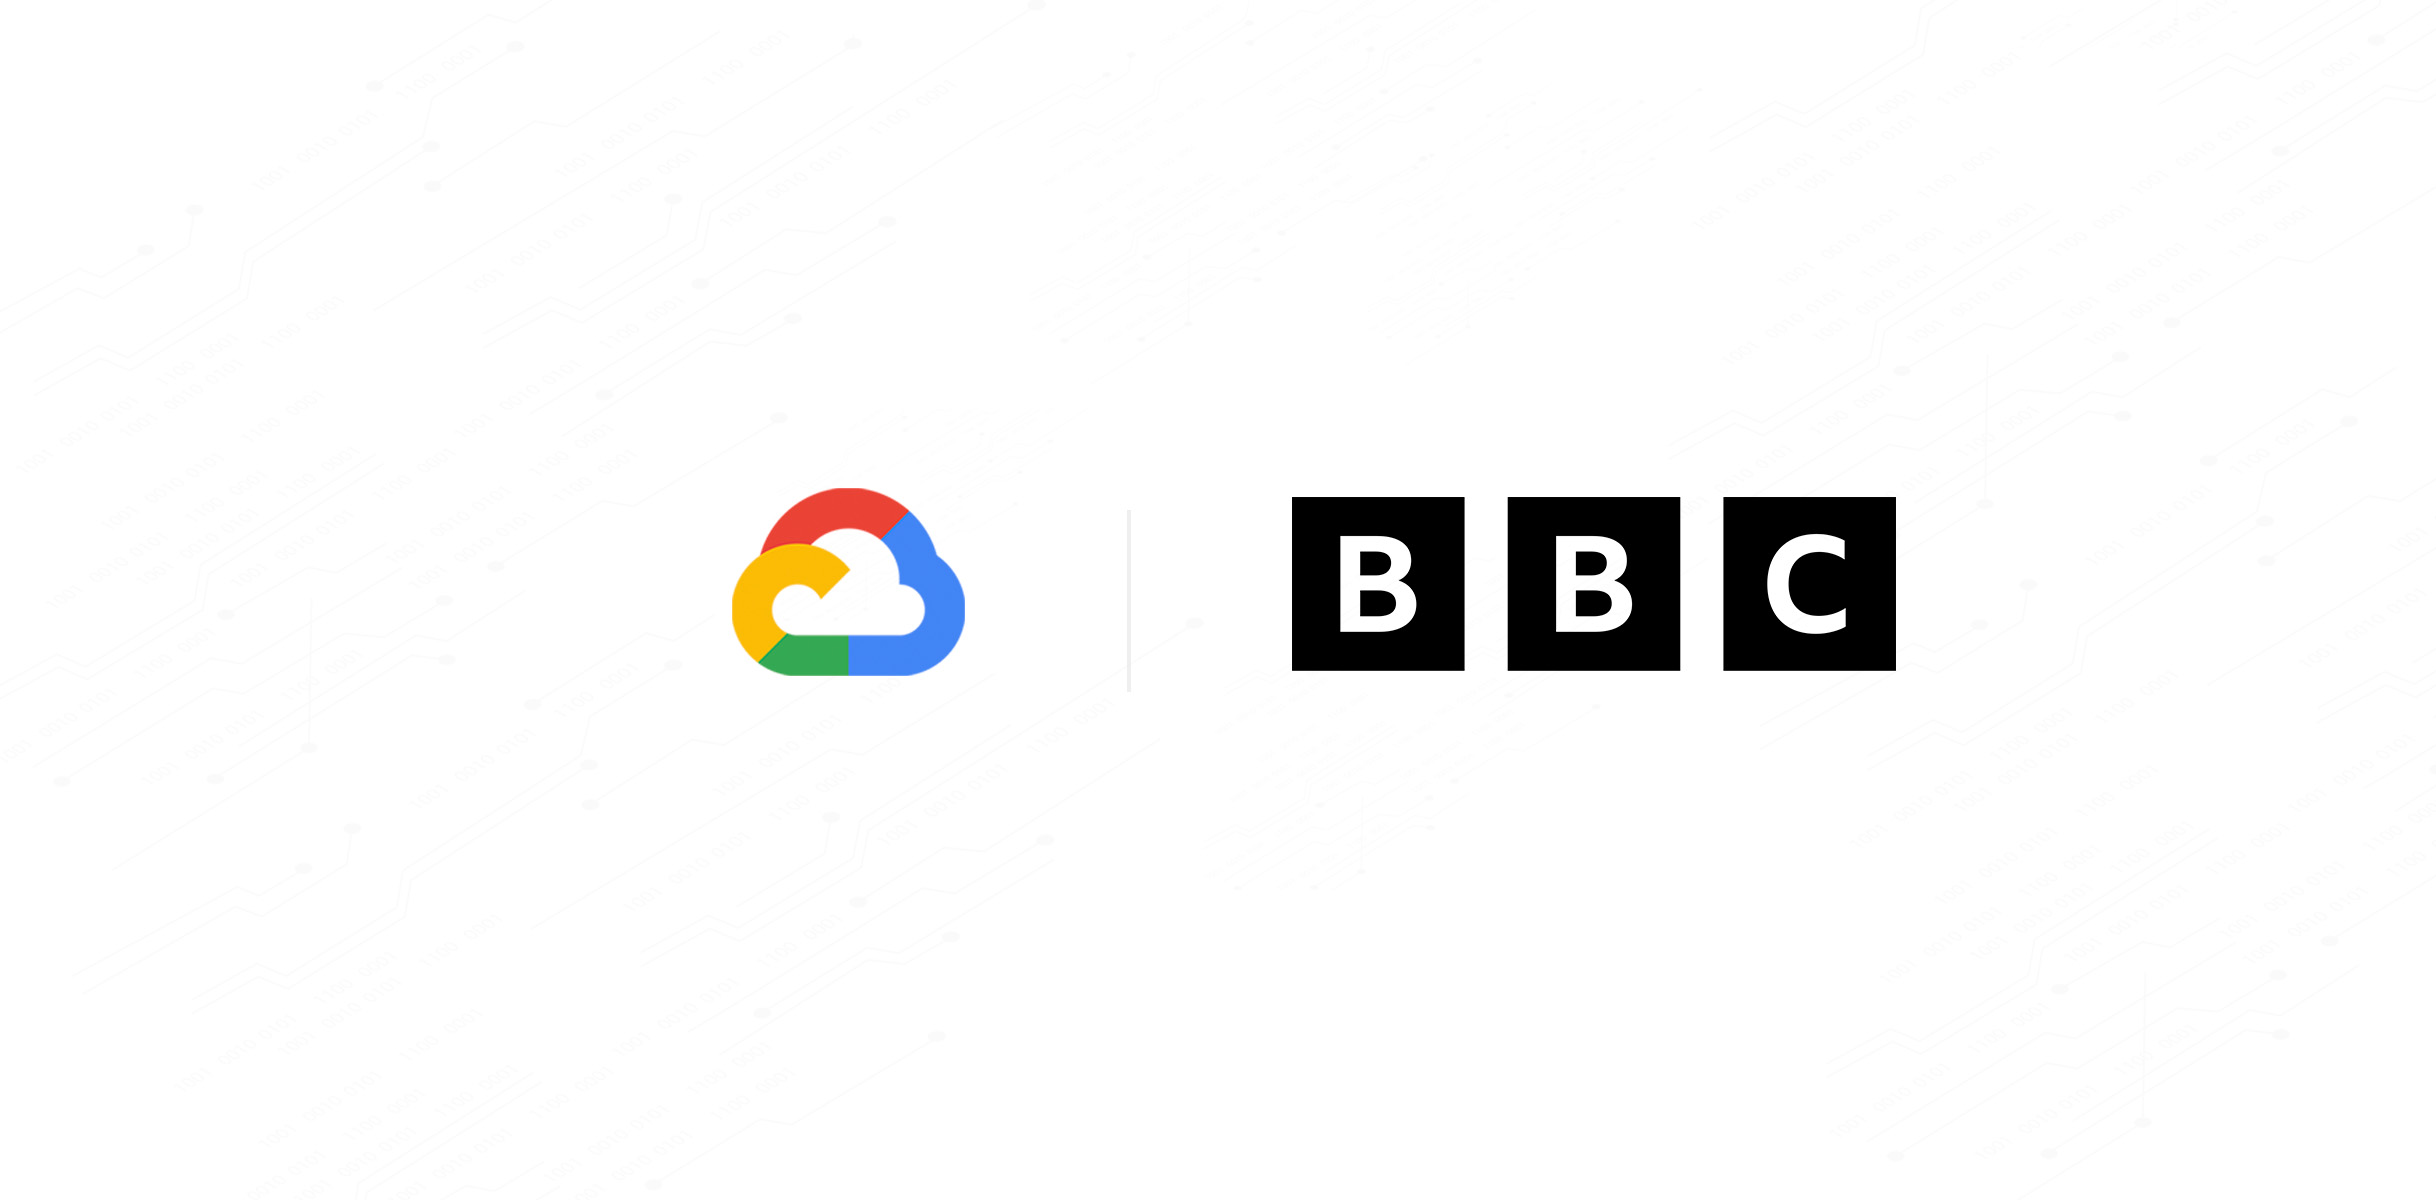 Google Cloud and BBC - Credit Google Cloud and BBC